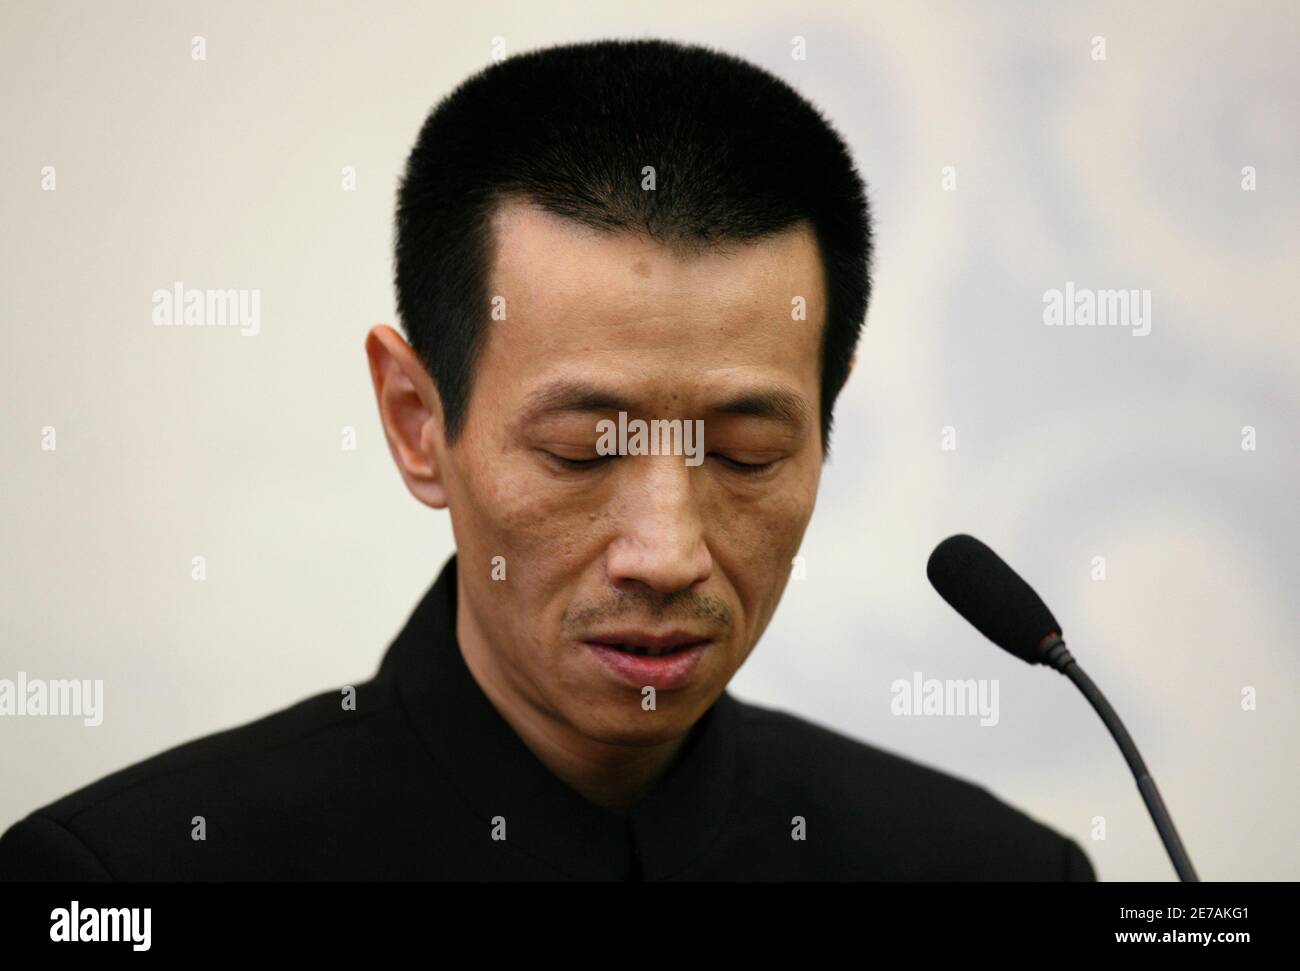 Cai Mingchao, the Chinese man who claims he was the winning bidder for two bronze sculptures at a Paris auction last week, speaks at a news conference in Beijing March 2, 2009. Cai, an adviser to a fund that seeks to retrieve looted treasures, said on Monday that he was the winning bidder for the sculptures at the auction, but he had no intention paying for the controversial treasures looted from Beijing. The two sculptures, heads of a rat and a rabbit, were from the estate of Yves Saint Laurent and sold for 15 million euros each ($20 million) to a telephone bidder during the auction of the la Stock Photo